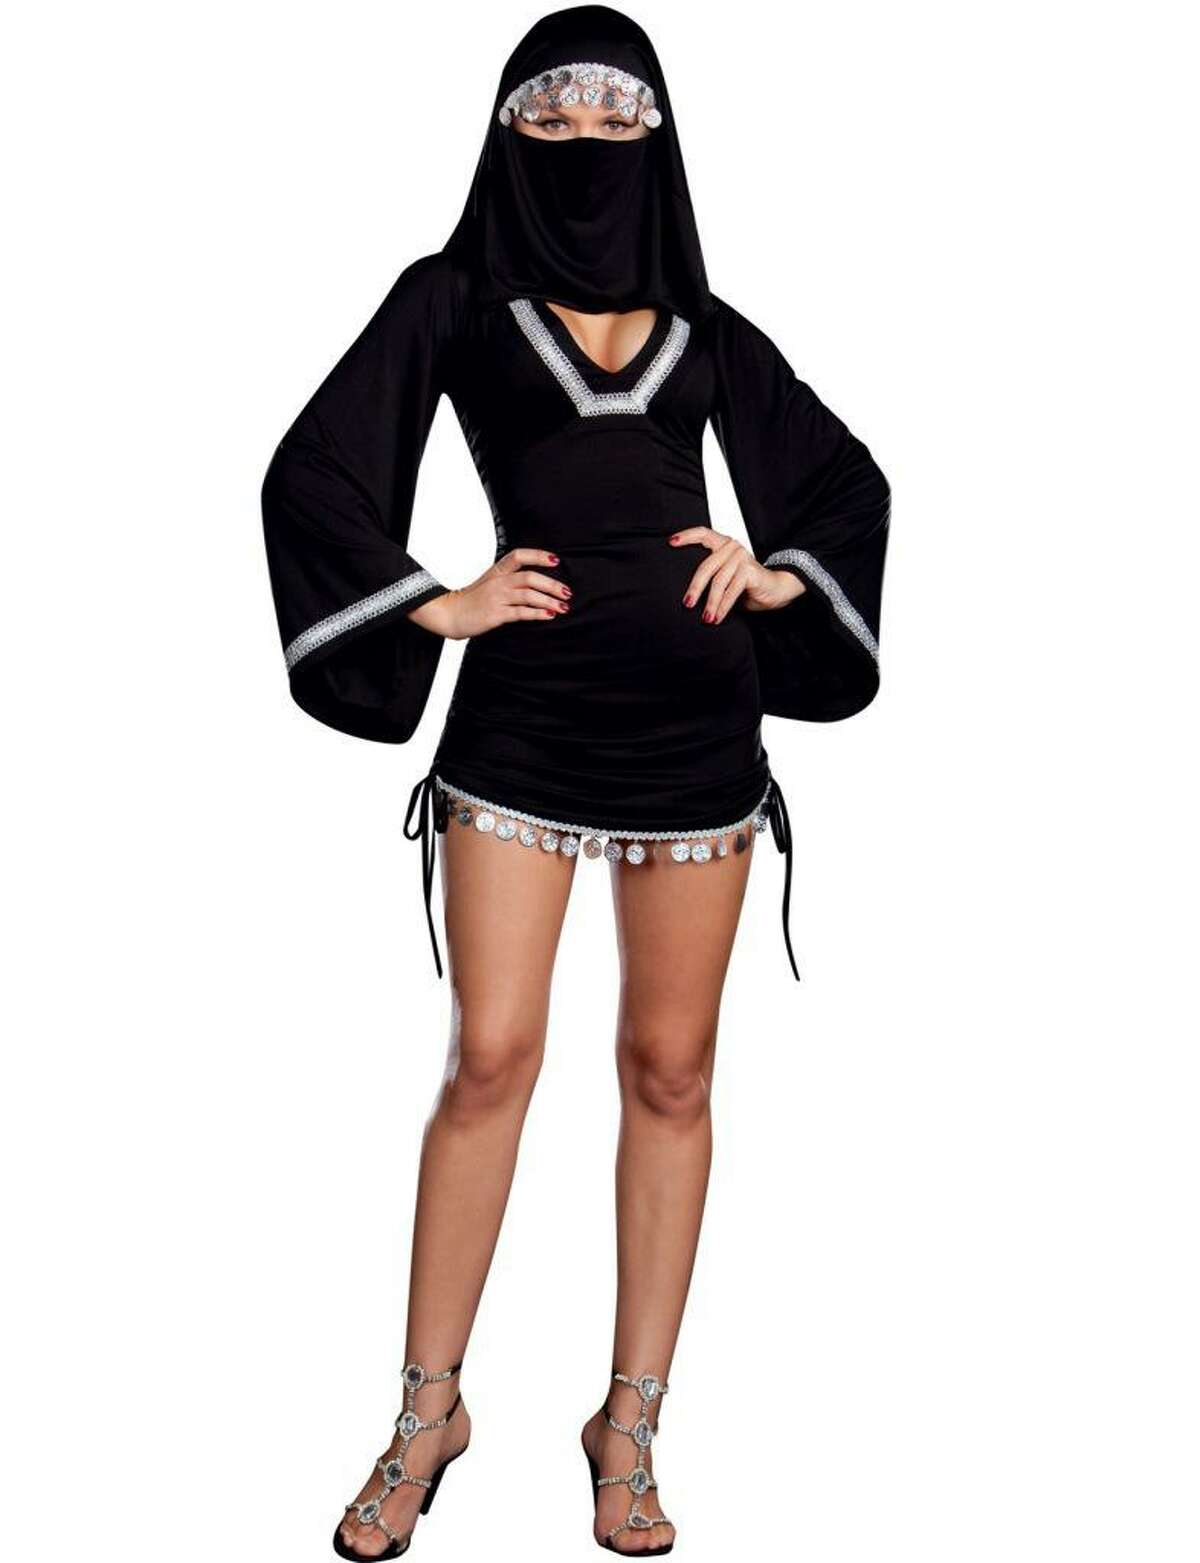 A "sexy Arab" costume. Don't wear this.